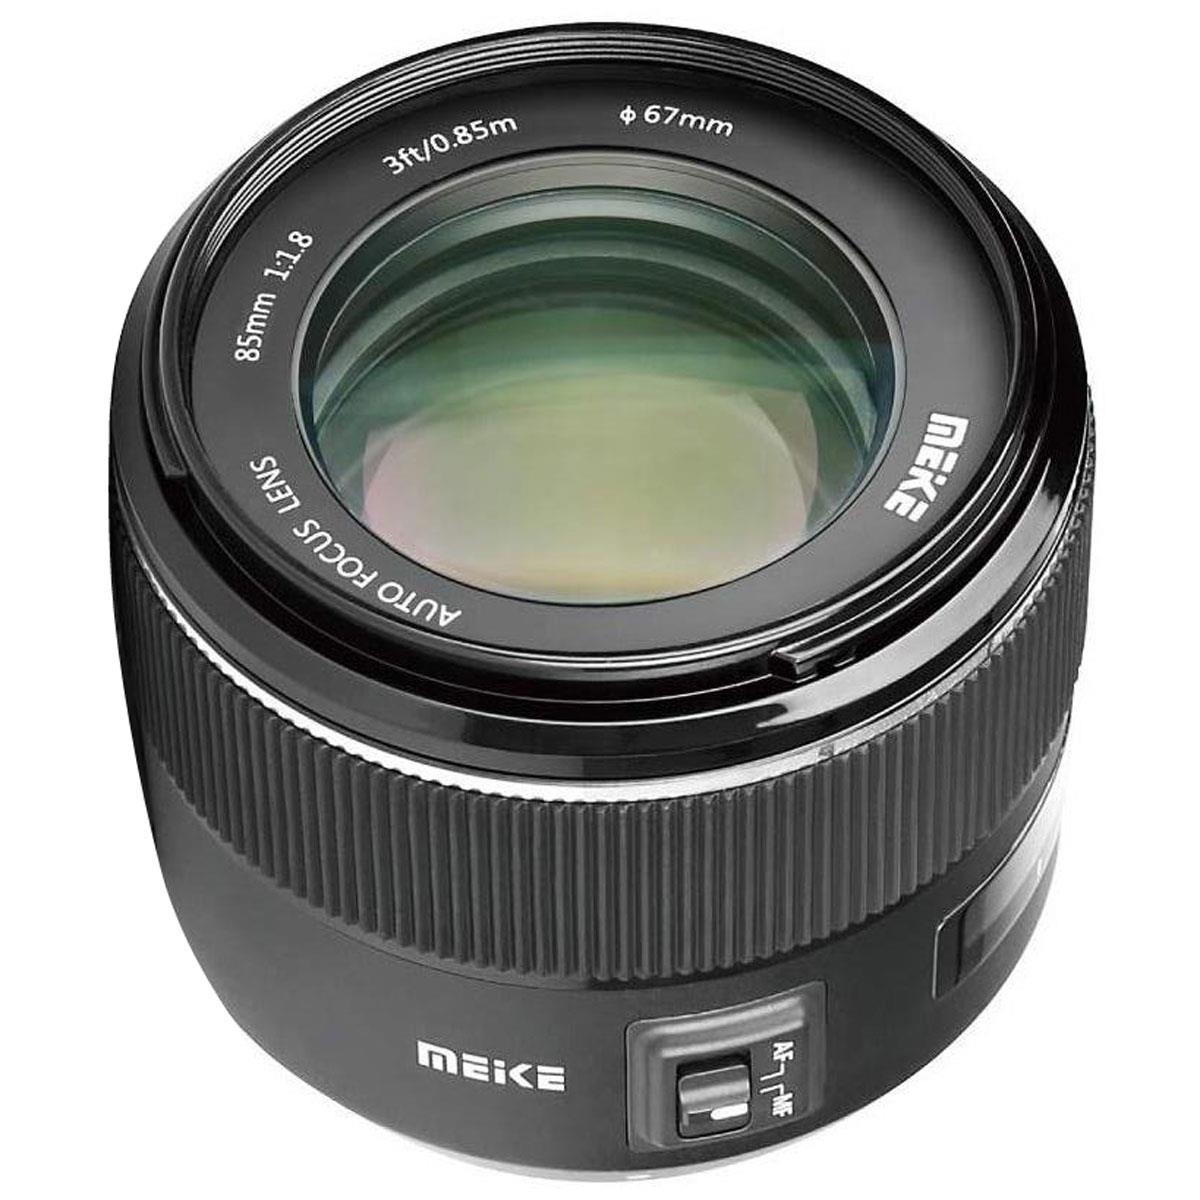 MEI-KE 85mm f/1.8 for Canon EF $139 + free s/h at Adorama